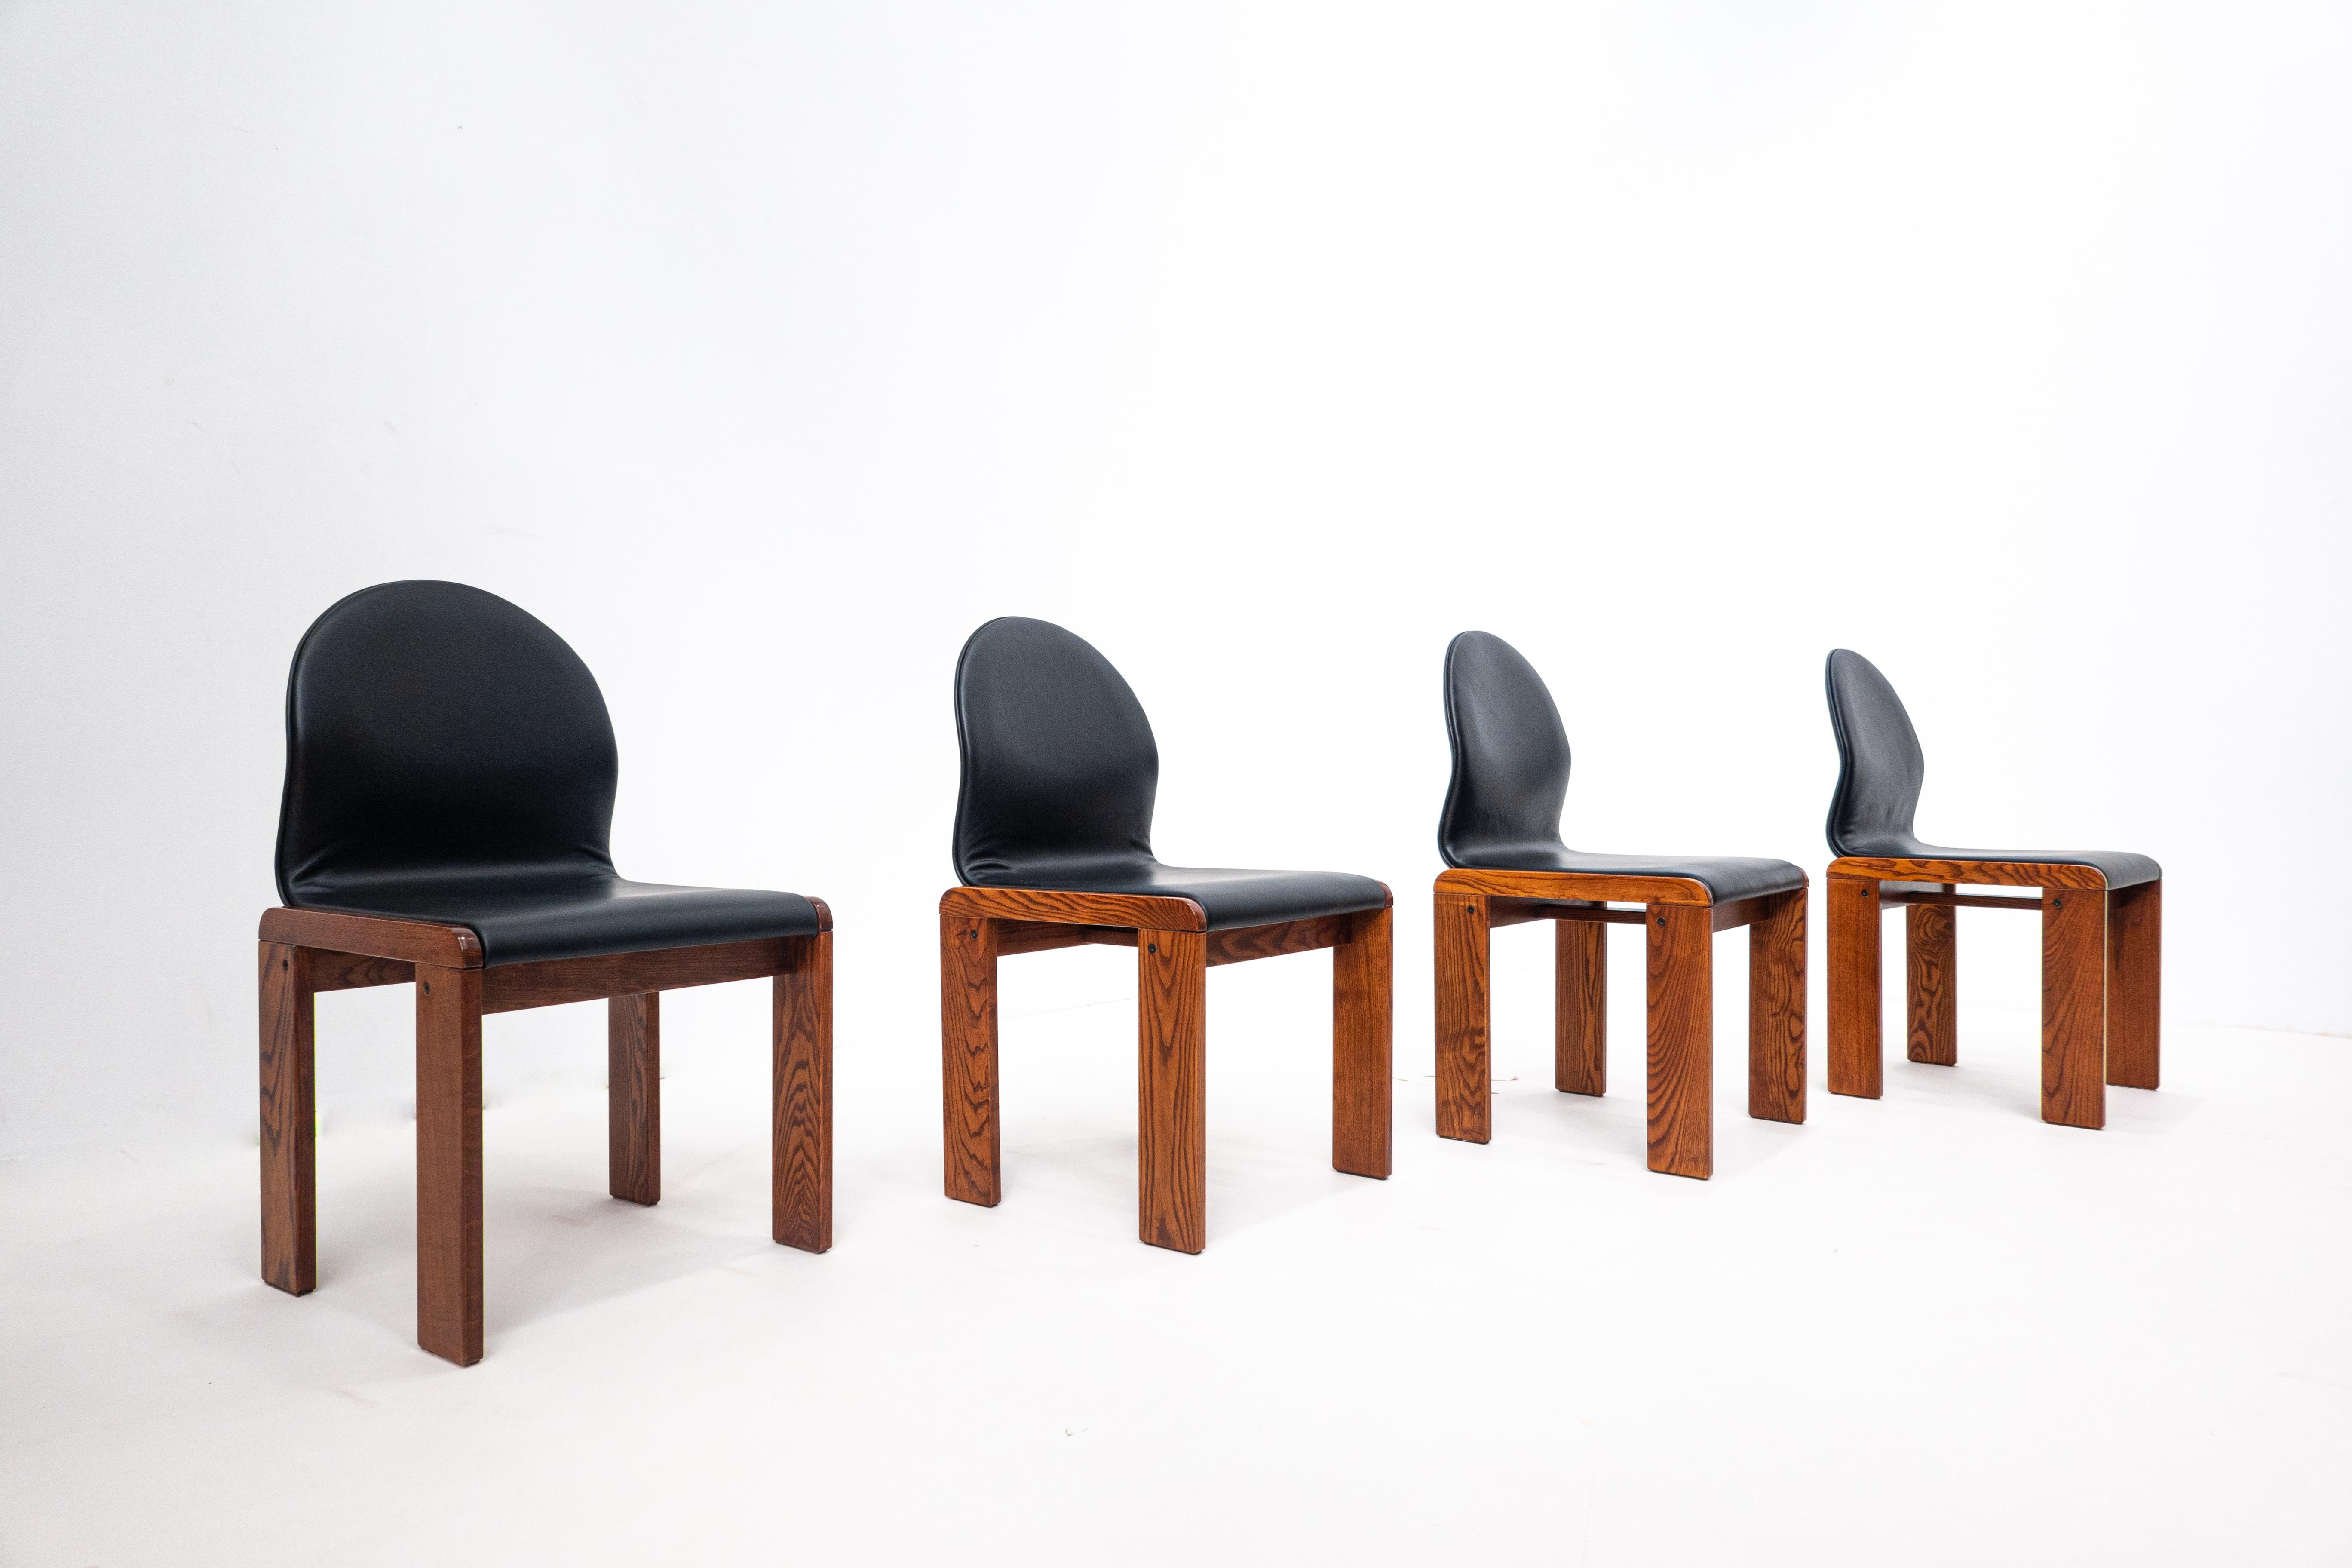 Set of 4 walnut and leather chairs by Afra and Tobia Scarpa, Italy, 1970s.